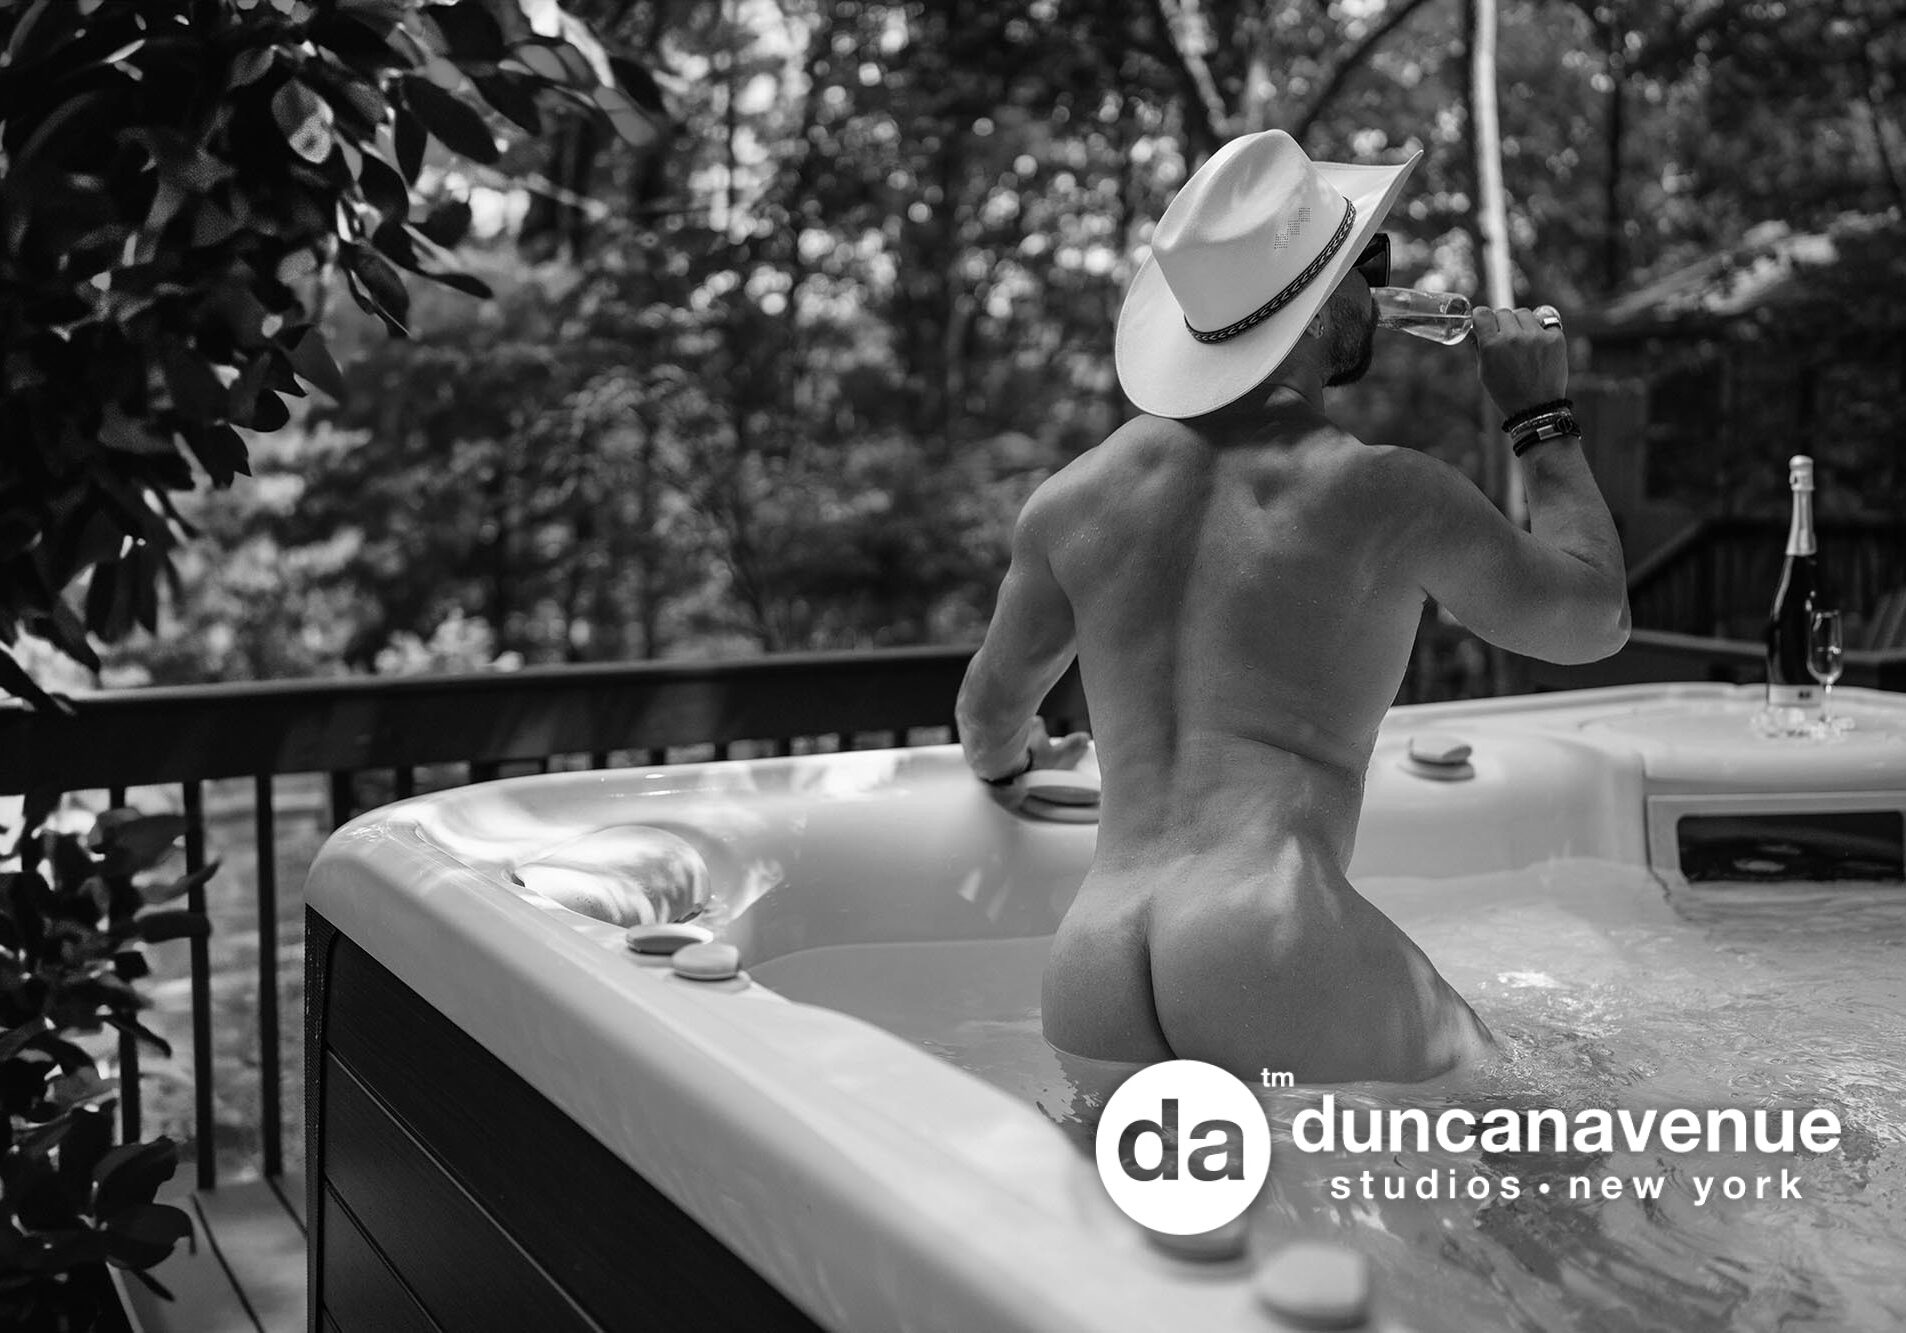 Sultry Springs: Cocky Cowboy's Hot Tub Hijinks – A Dive into the Depths of Fine Art Male Boudoir Photography – Presented by HARD NEW YORK – Homoerotic Art Gallery